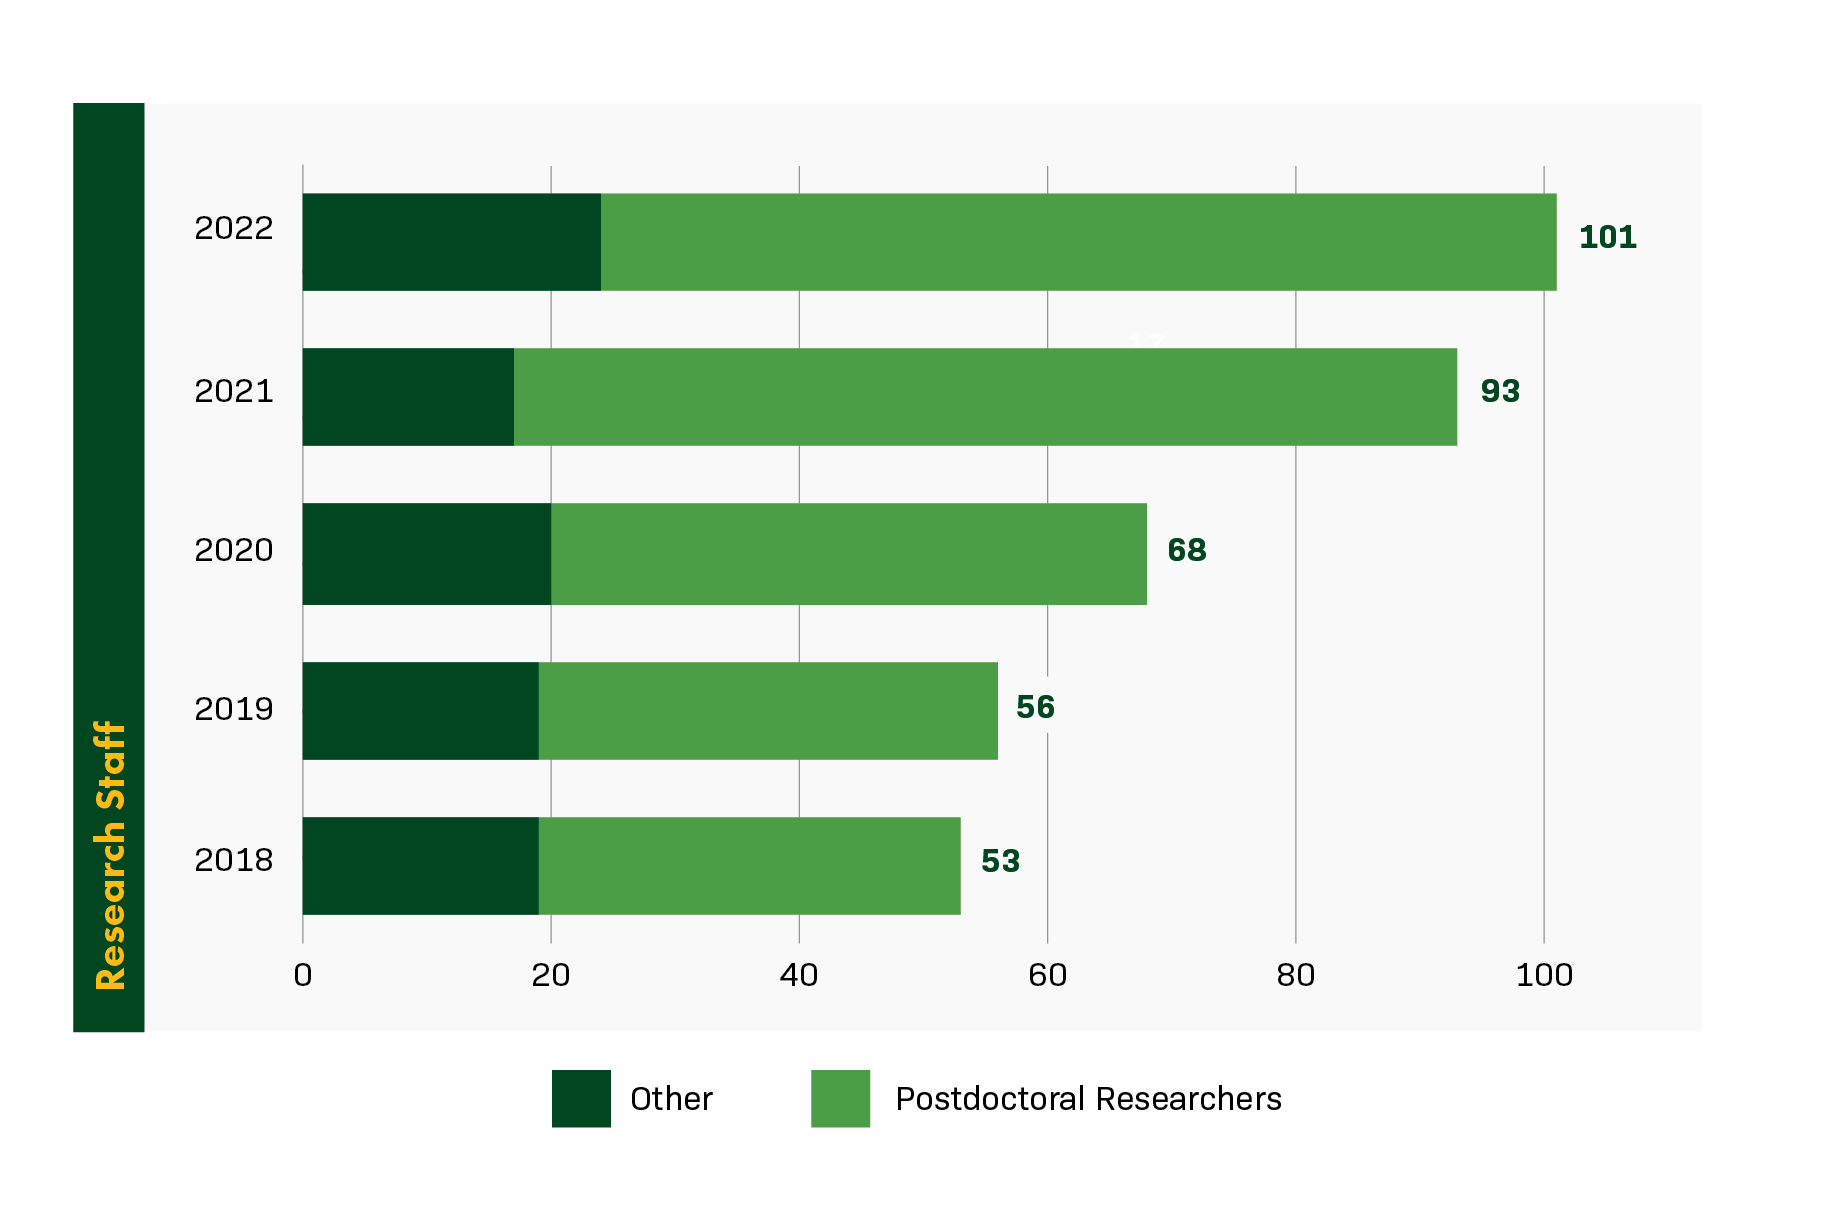 Bar Chart of Research Staff